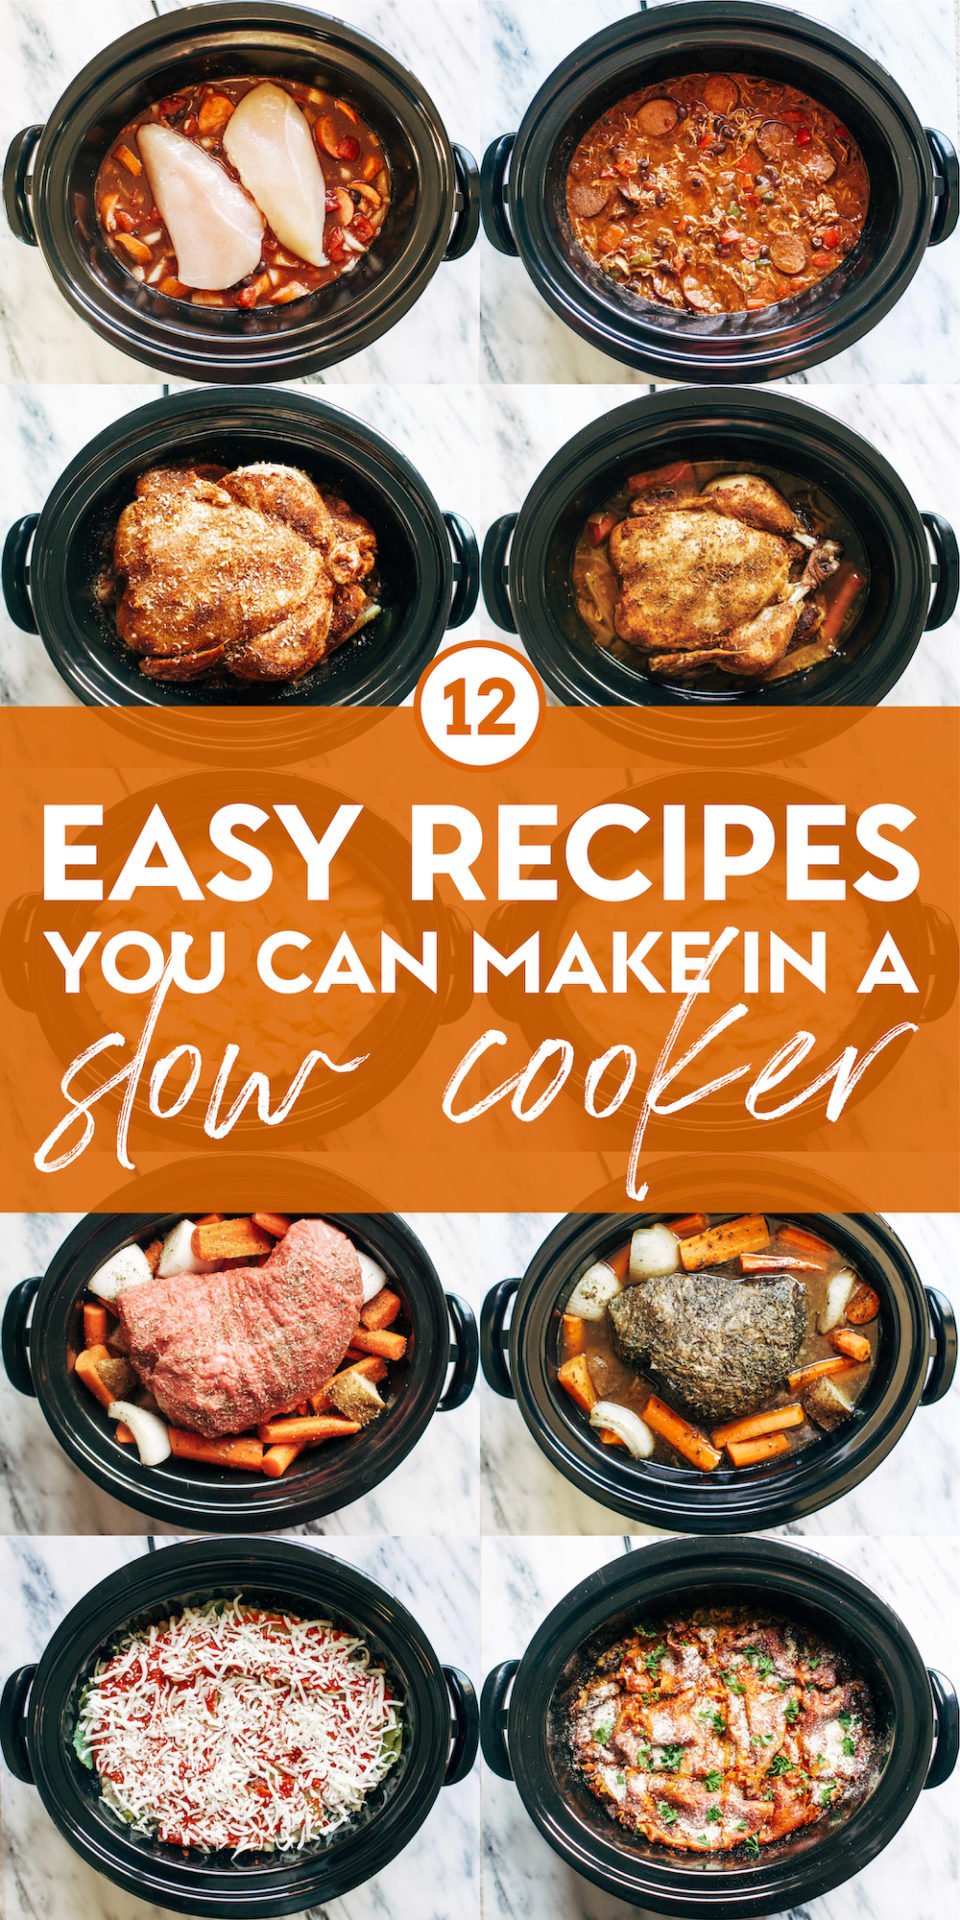 https://pinchofyum.com/wp-content/uploads/Easy-Recipes-for-Slow-Cooker-Hero-Image-01-960x1920.jpg